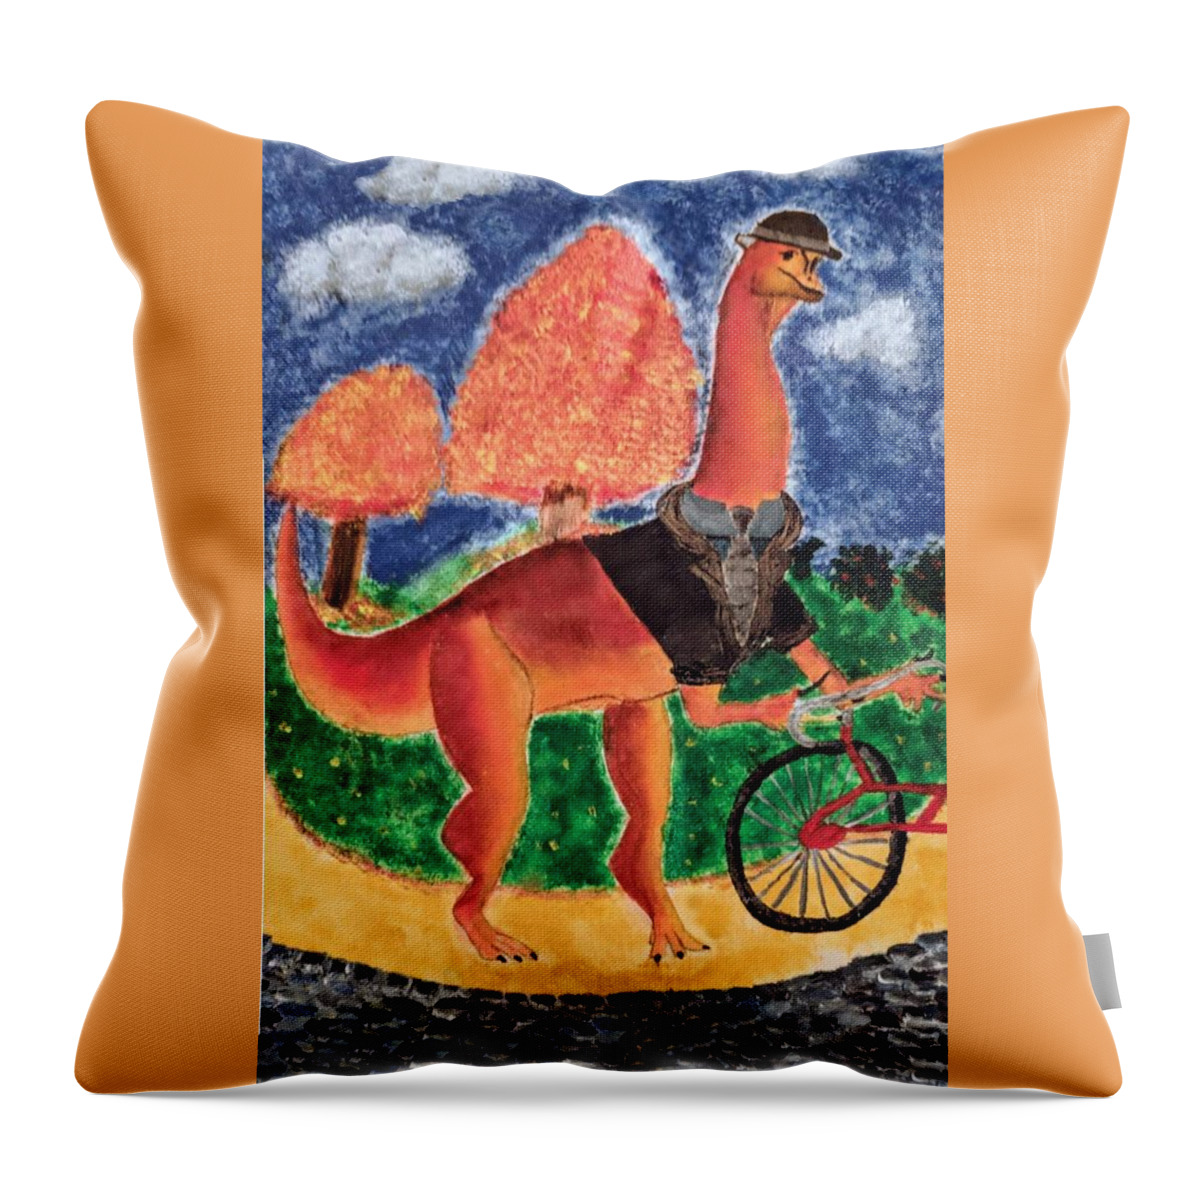 Dinosaur Throw Pillow featuring the painting Veloci-saurus by Misty Morehead